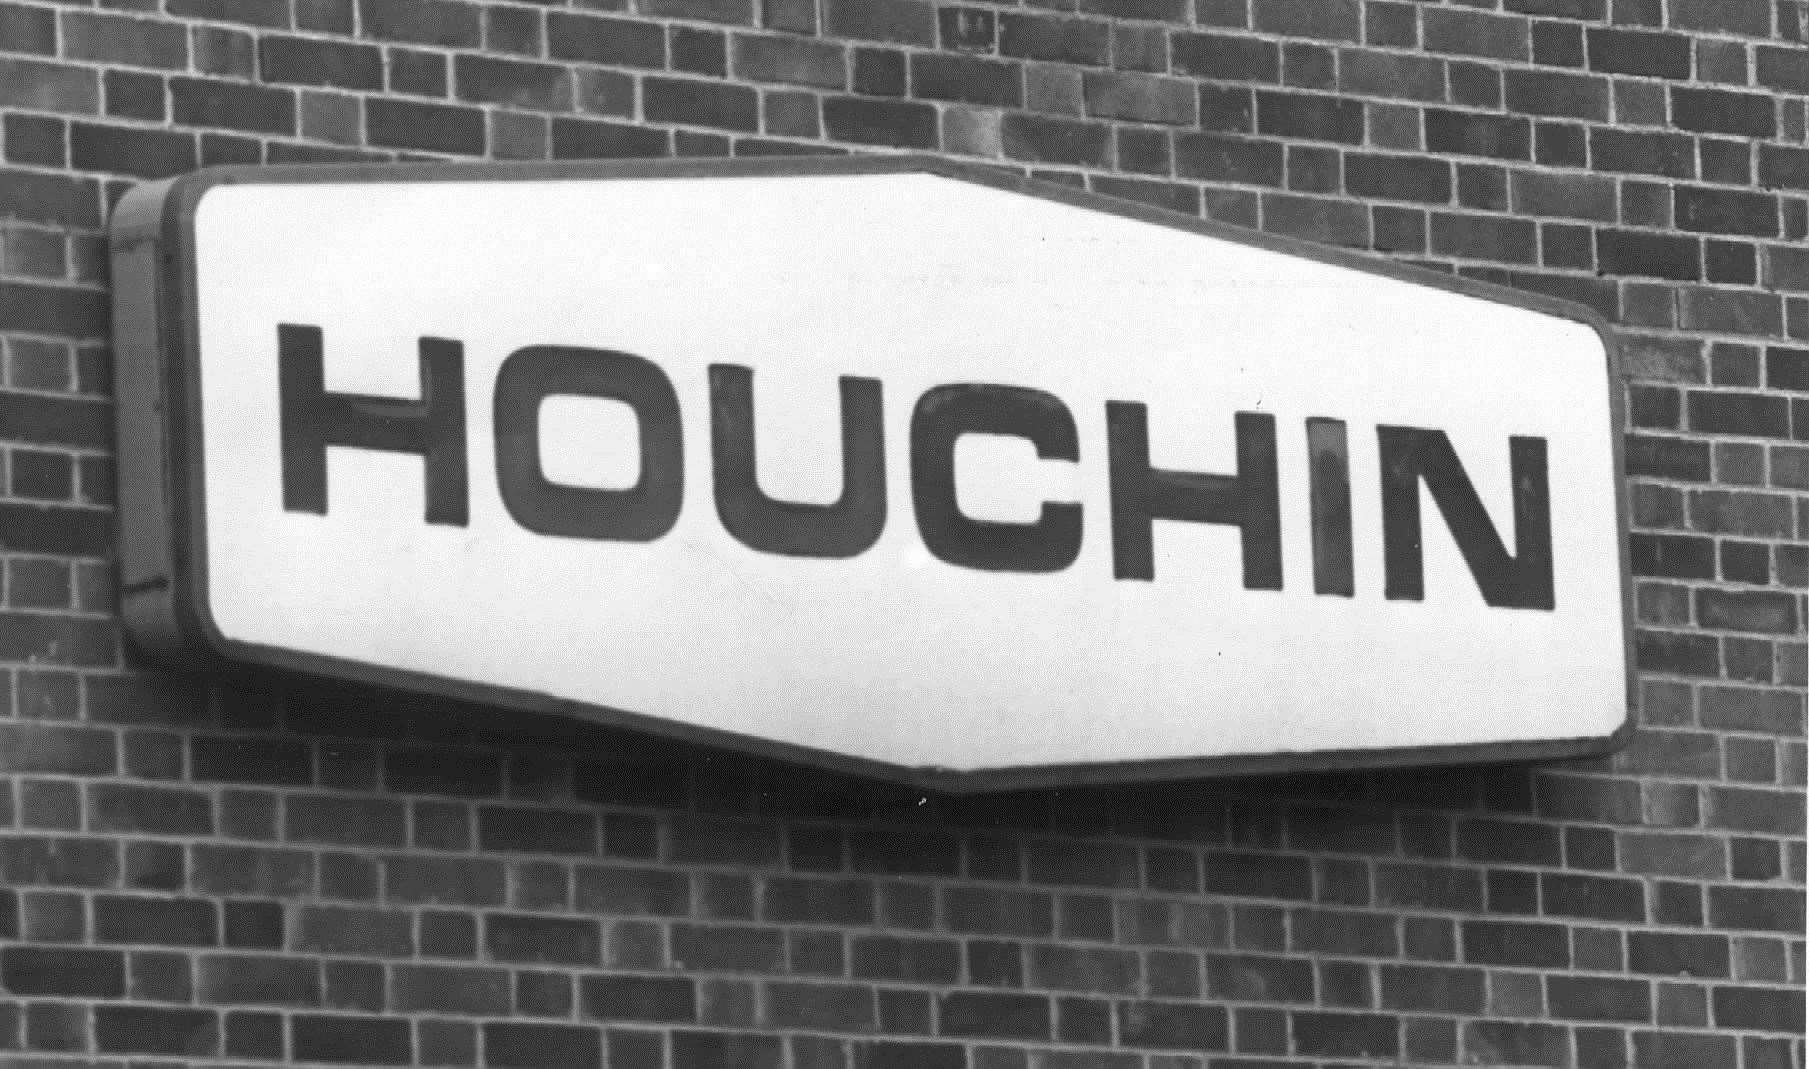 Houchin had occupied the site since 1945